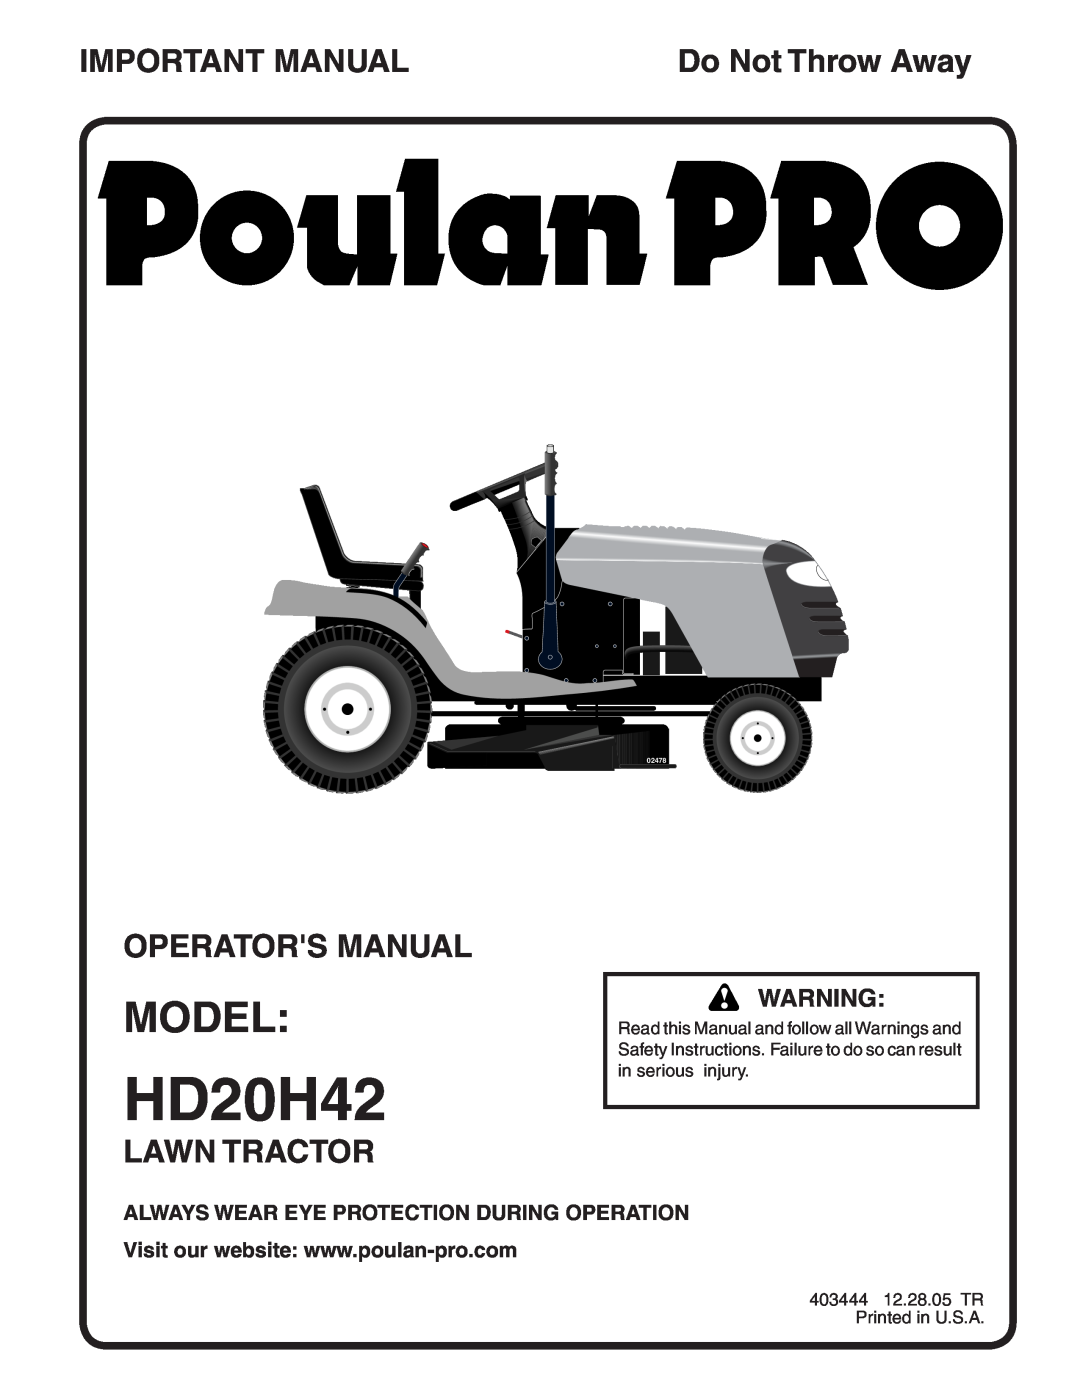 Poulan HD20H42 manual Model, Important Manual, Operators Manual, Lawn Tractor, Always Wear Eye Protection During Operation 